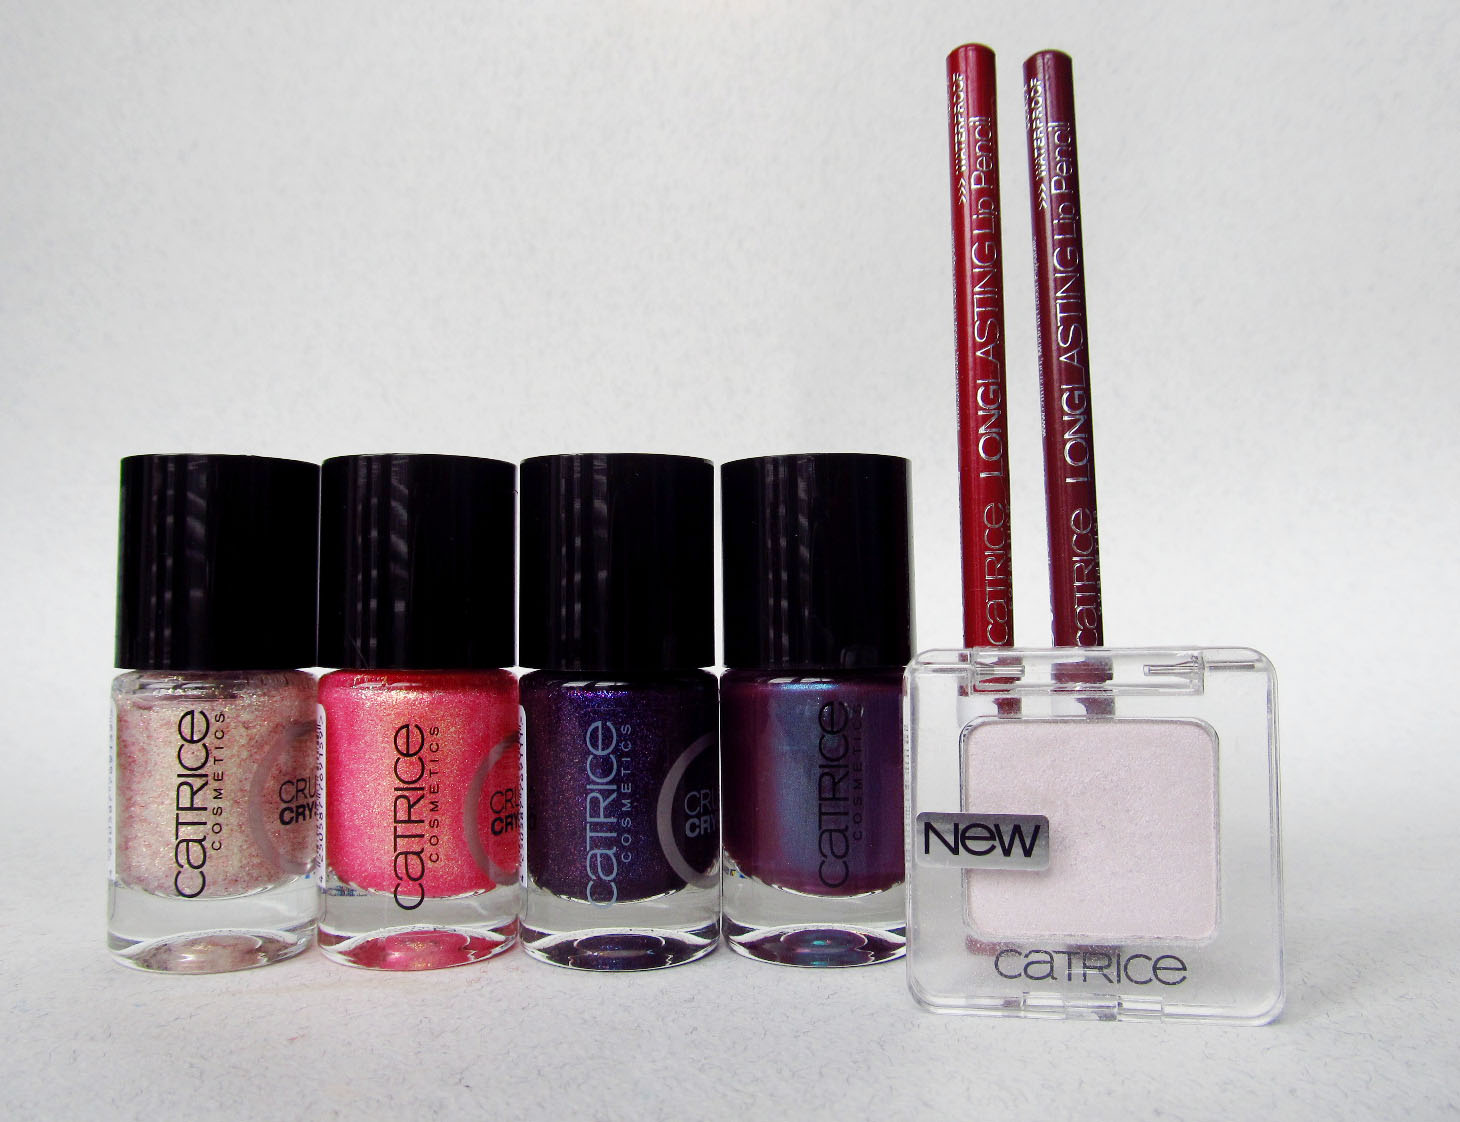 Passing Fancy Catrice New Products Spring 2014 Haul Swatches